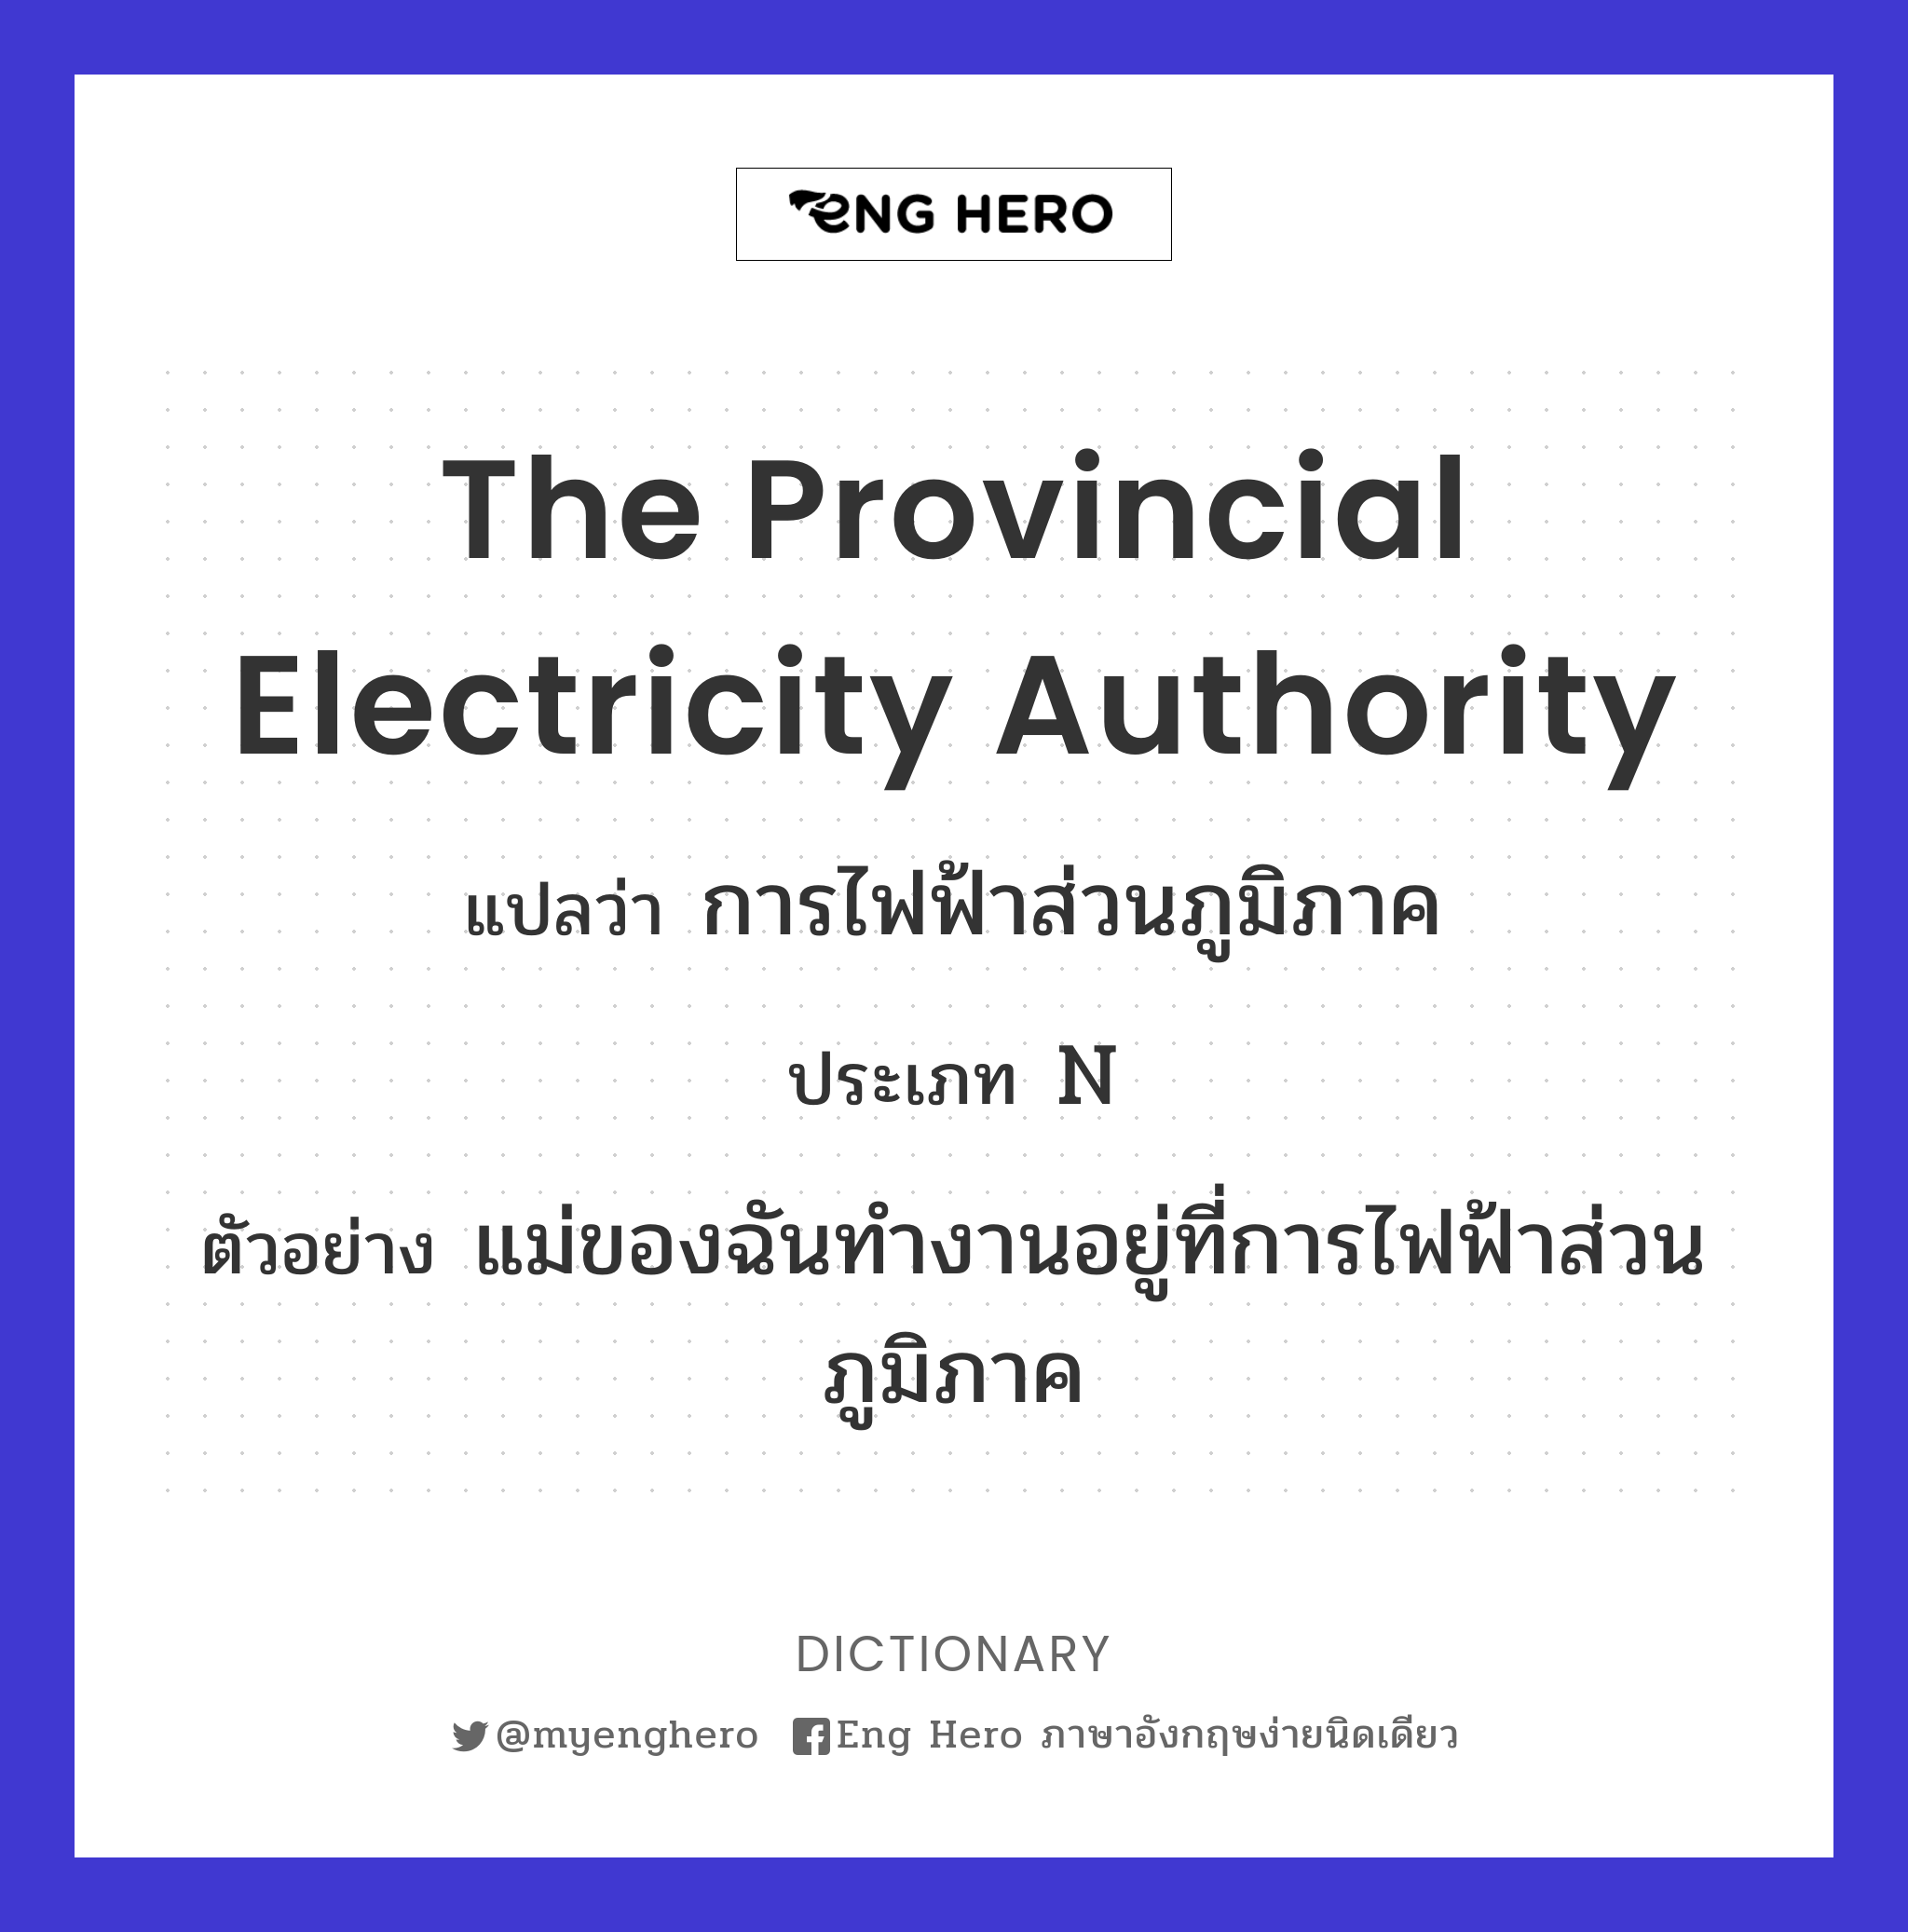 The Provincial Electricity Authority